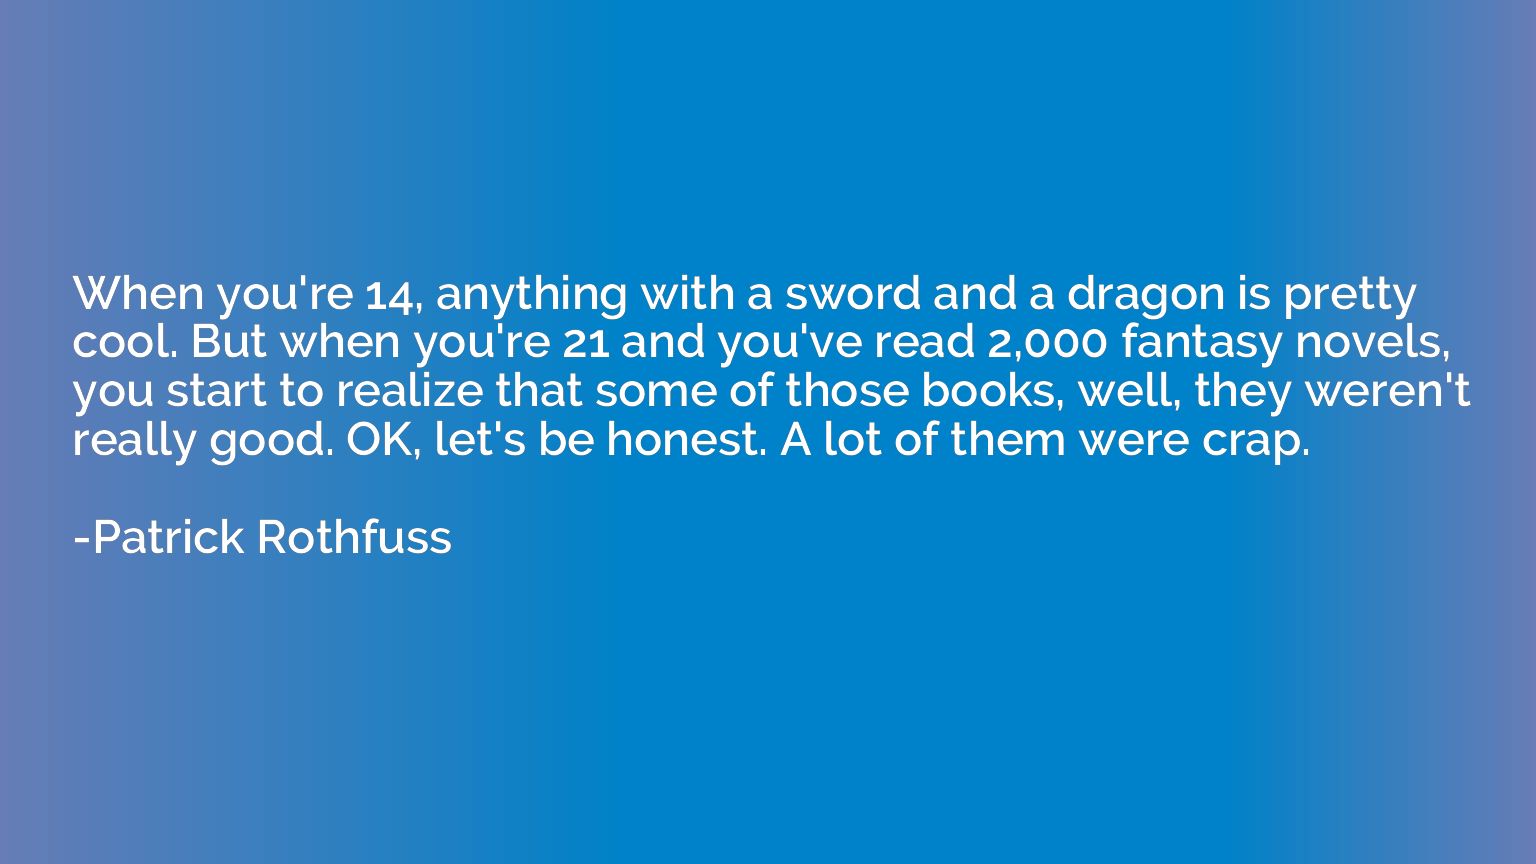 When you're 14, anything with a sword and a dragon is pretty